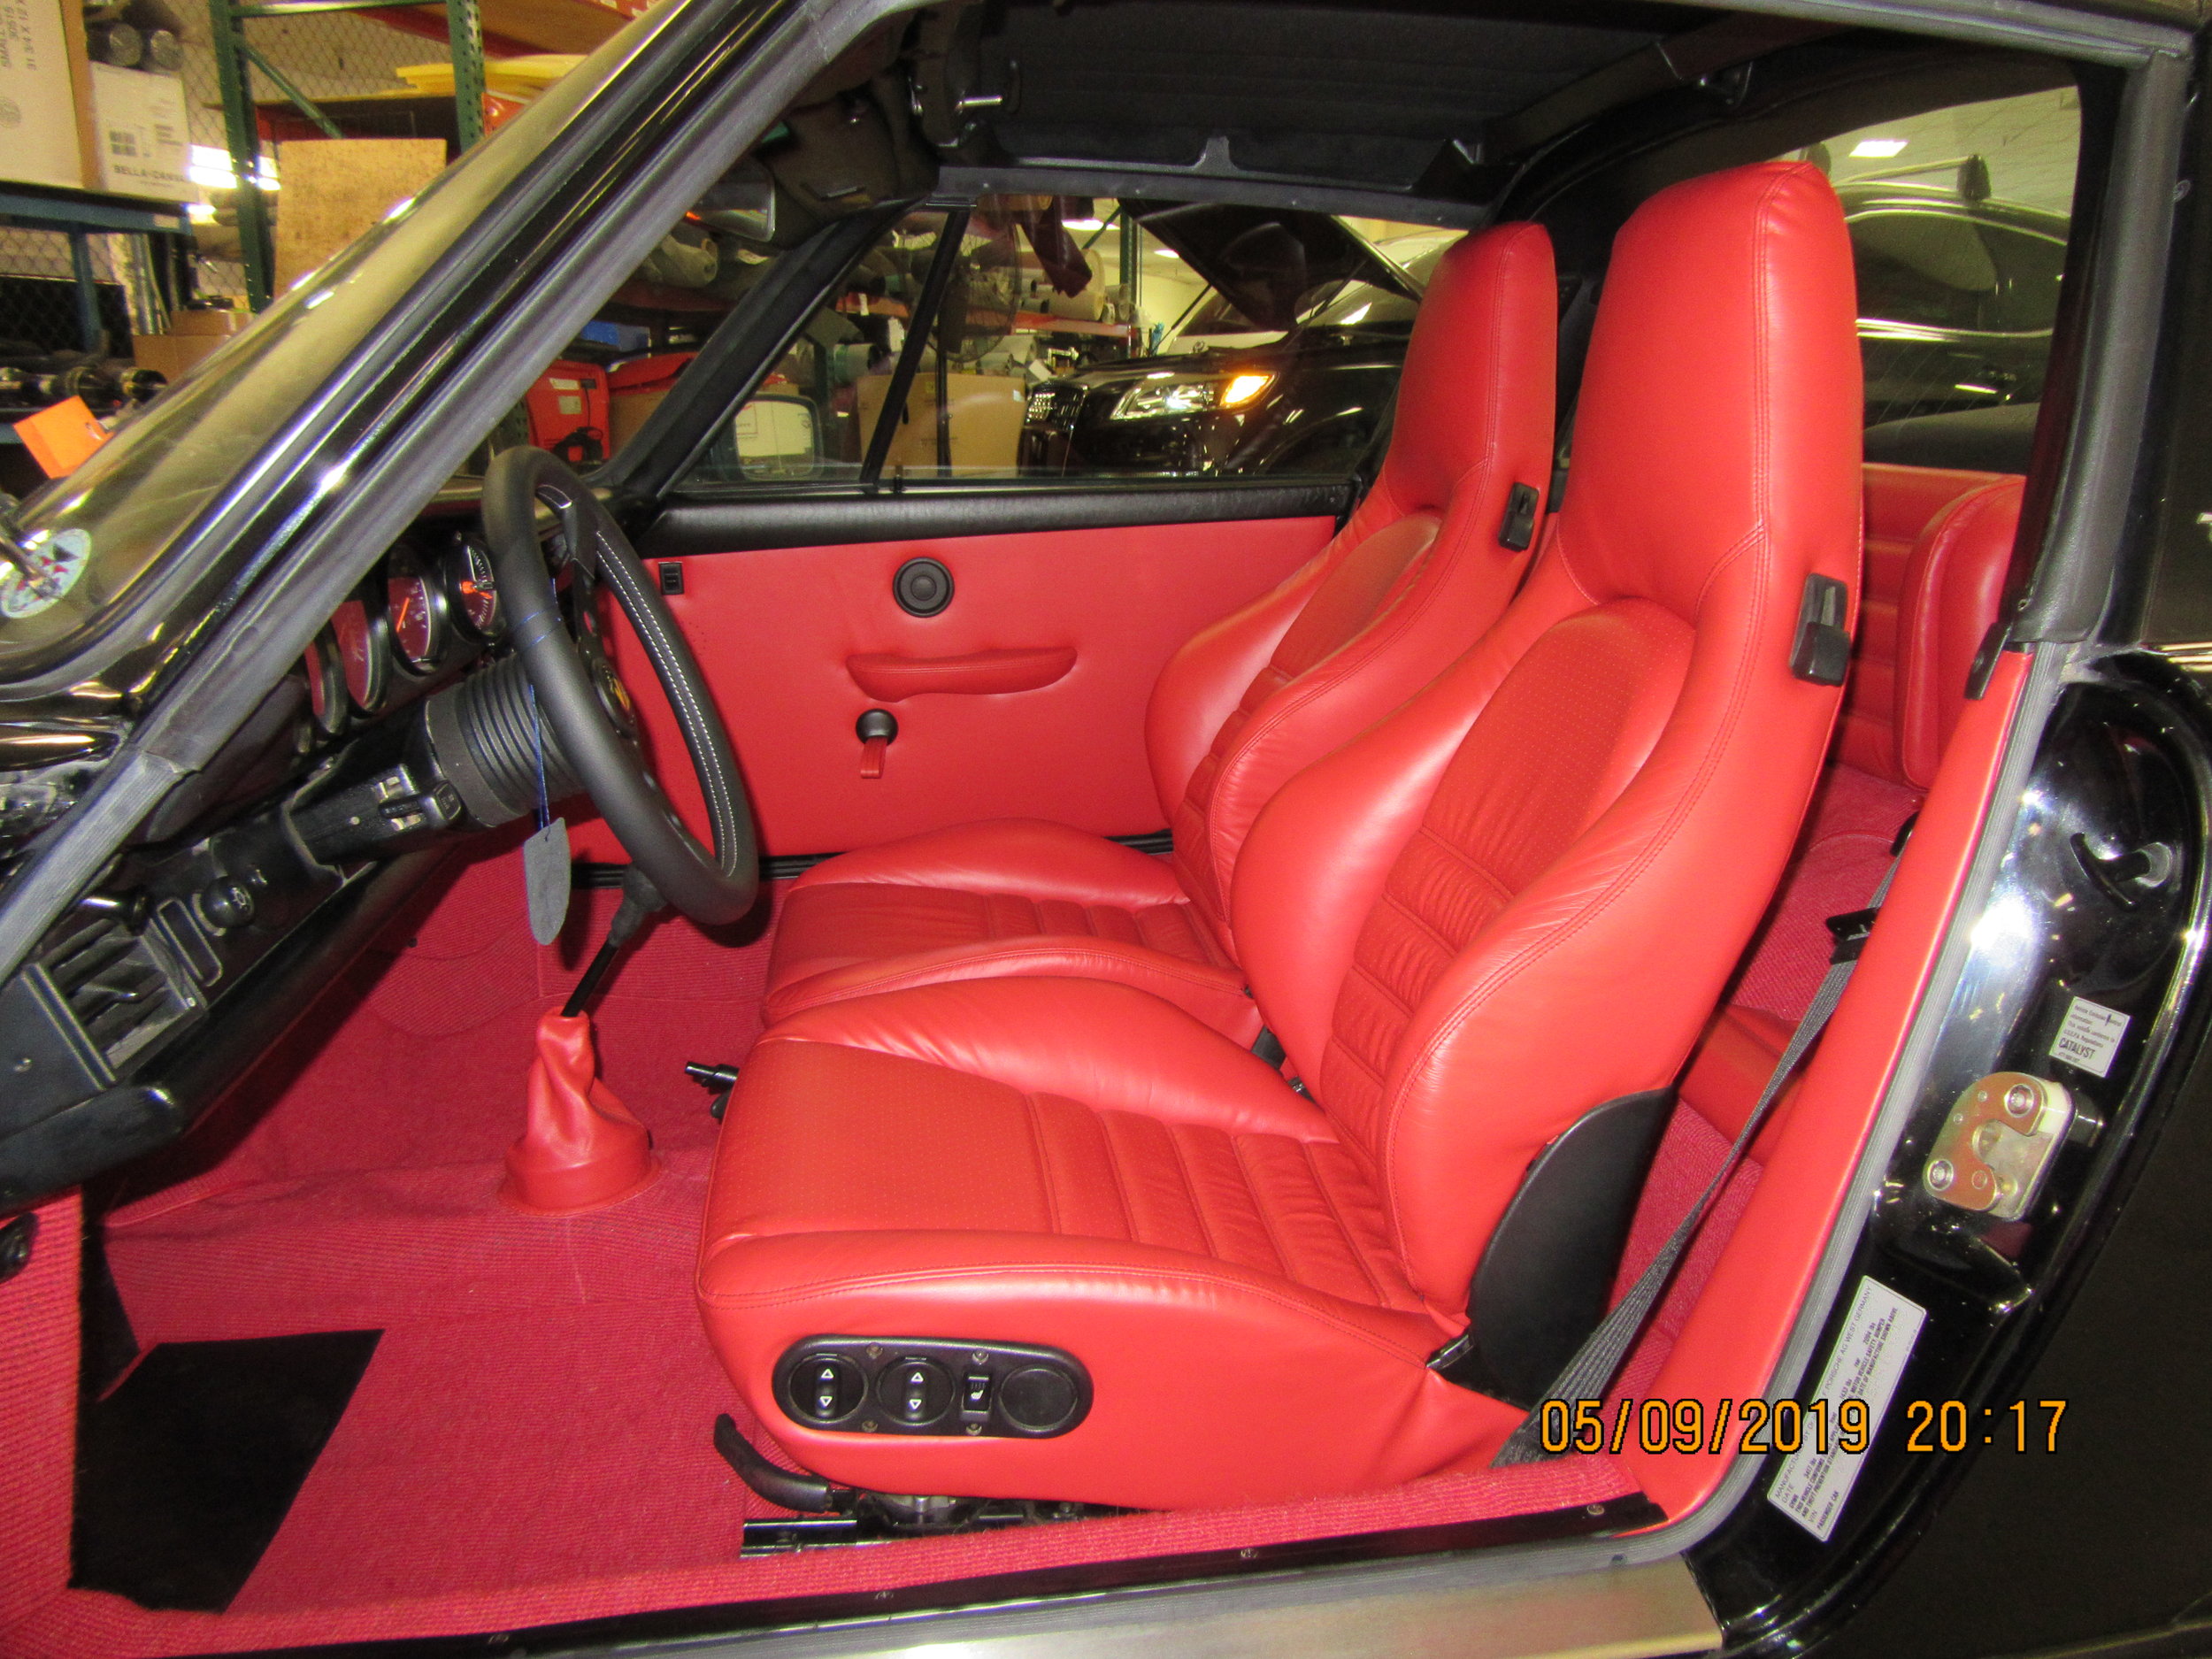  Lobster Red Leather Interior